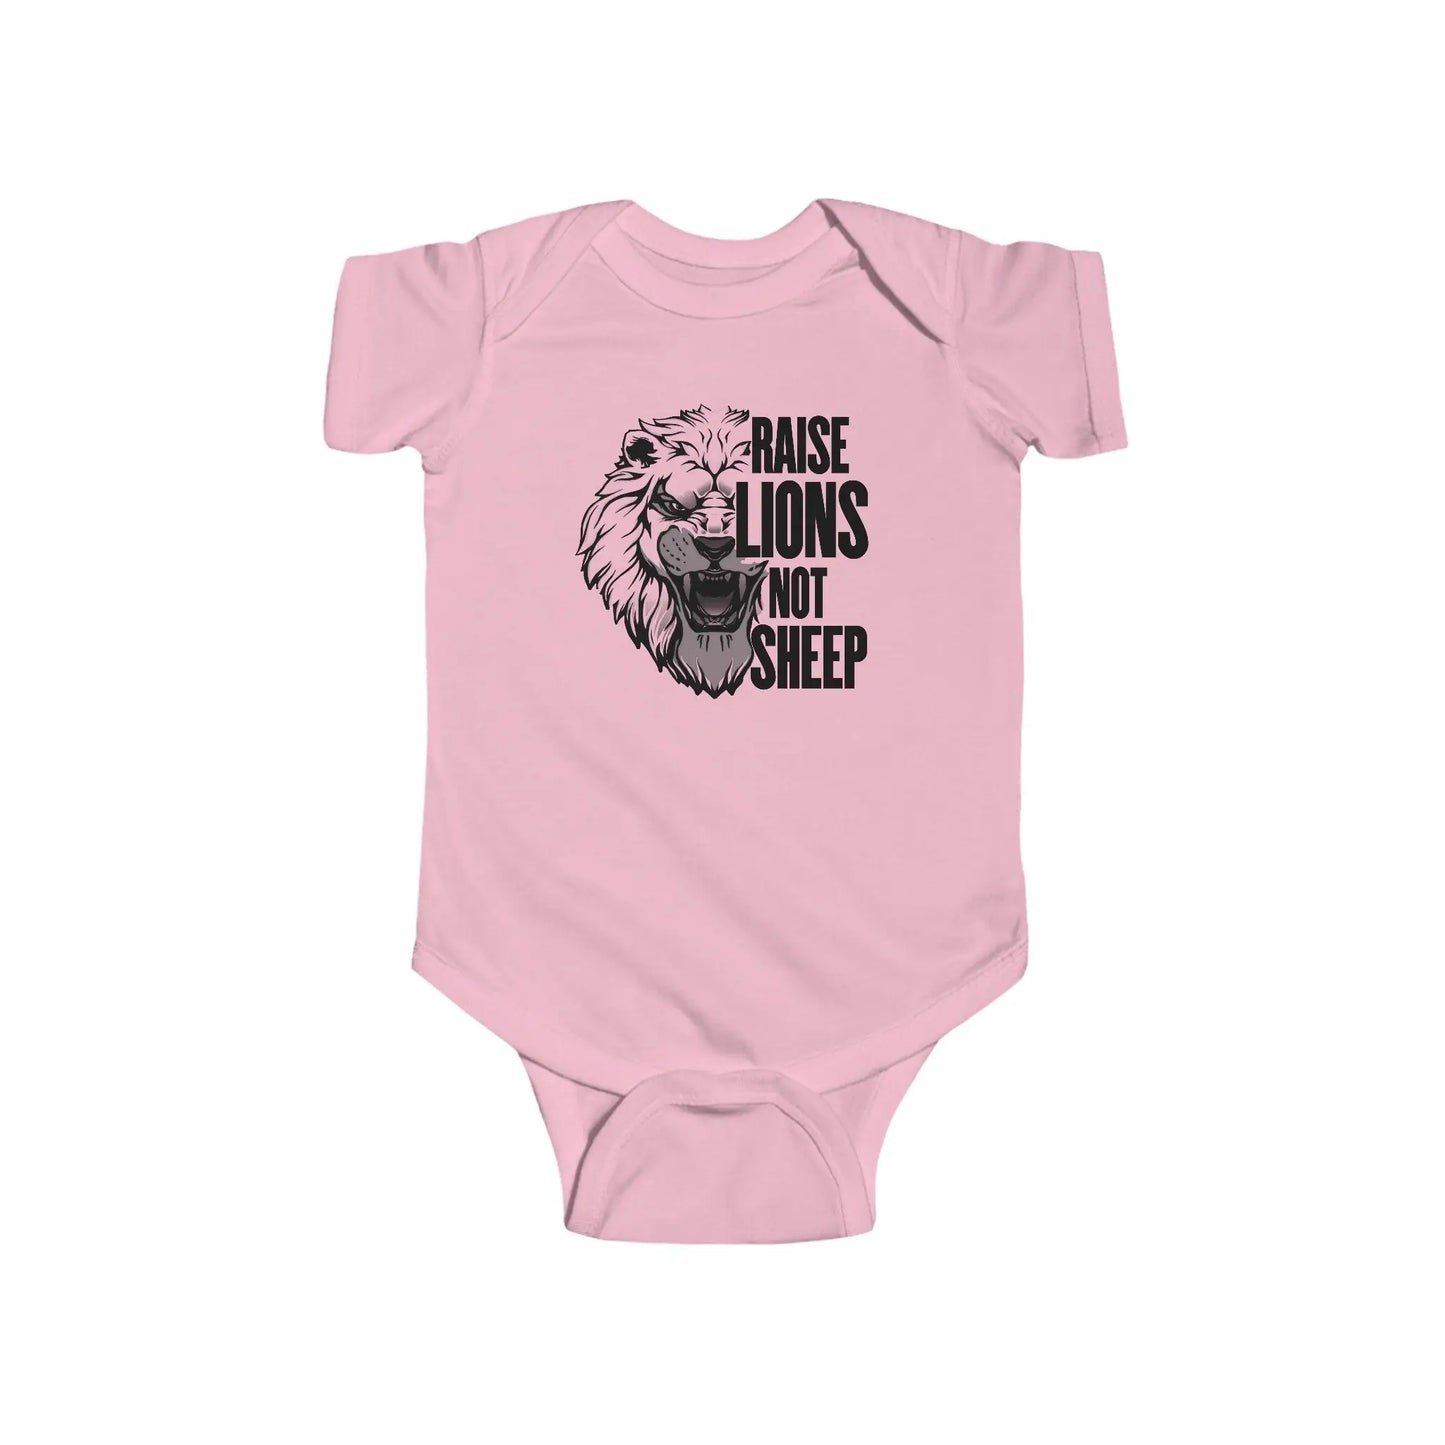 Raise Lions Not Sheep Infant Fine Jersey Bodysuit - Wicked Tees